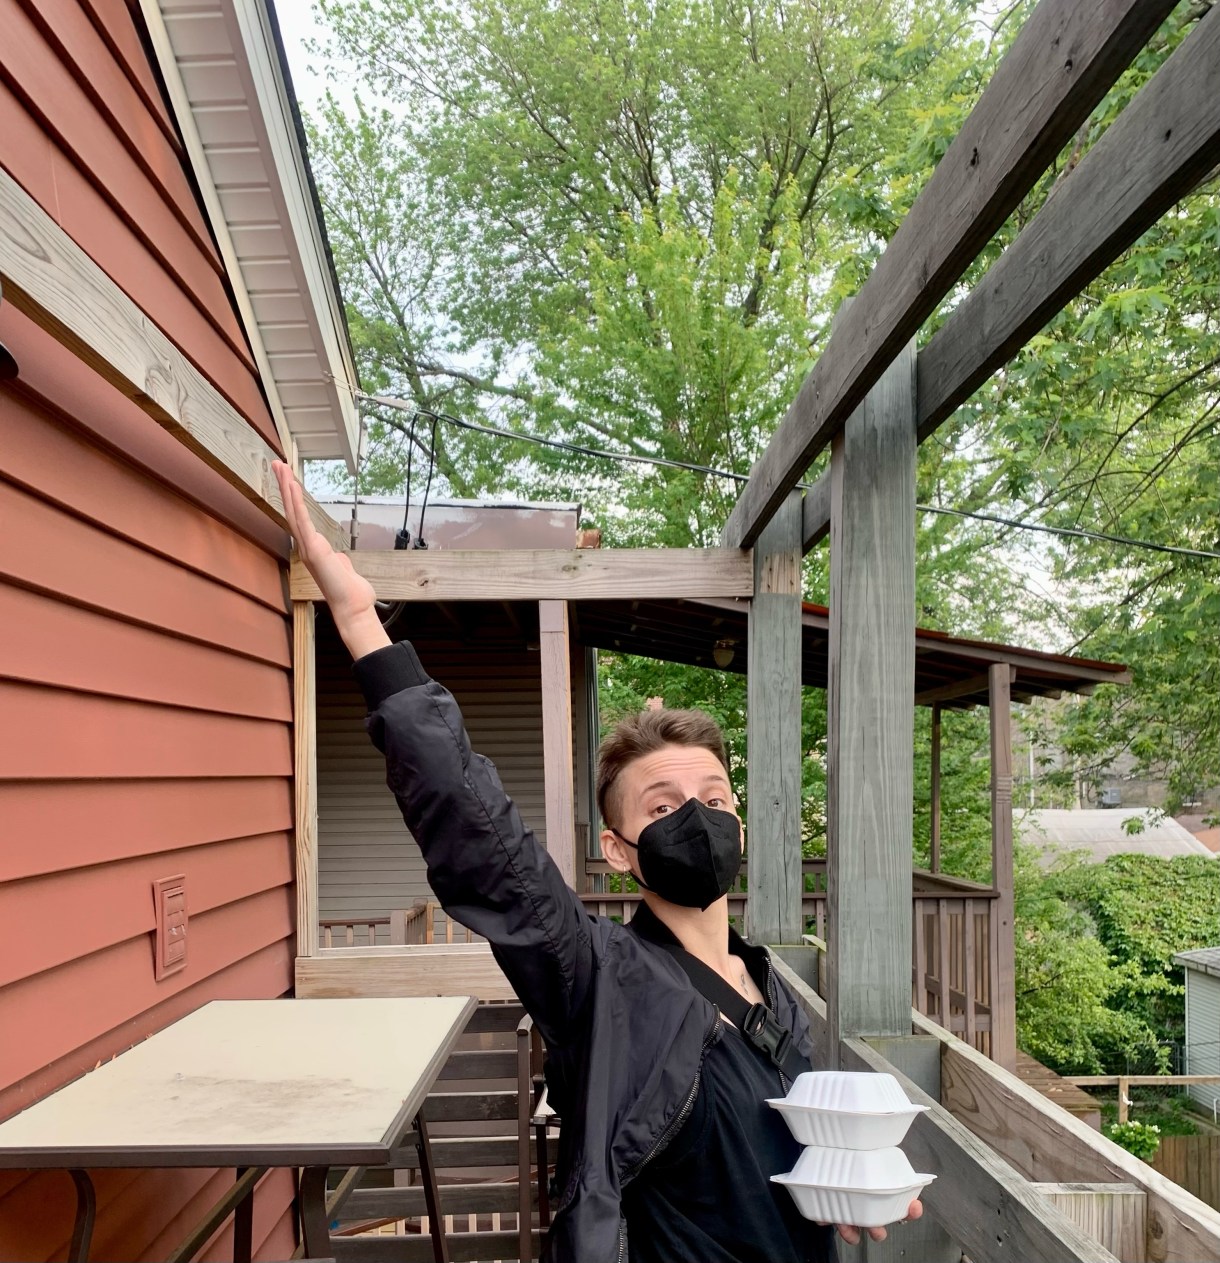 Ro gestures euphorically while holding what looks like some takeout containers. Ro is a white human with short brown hai wearing al black with an all black mask.